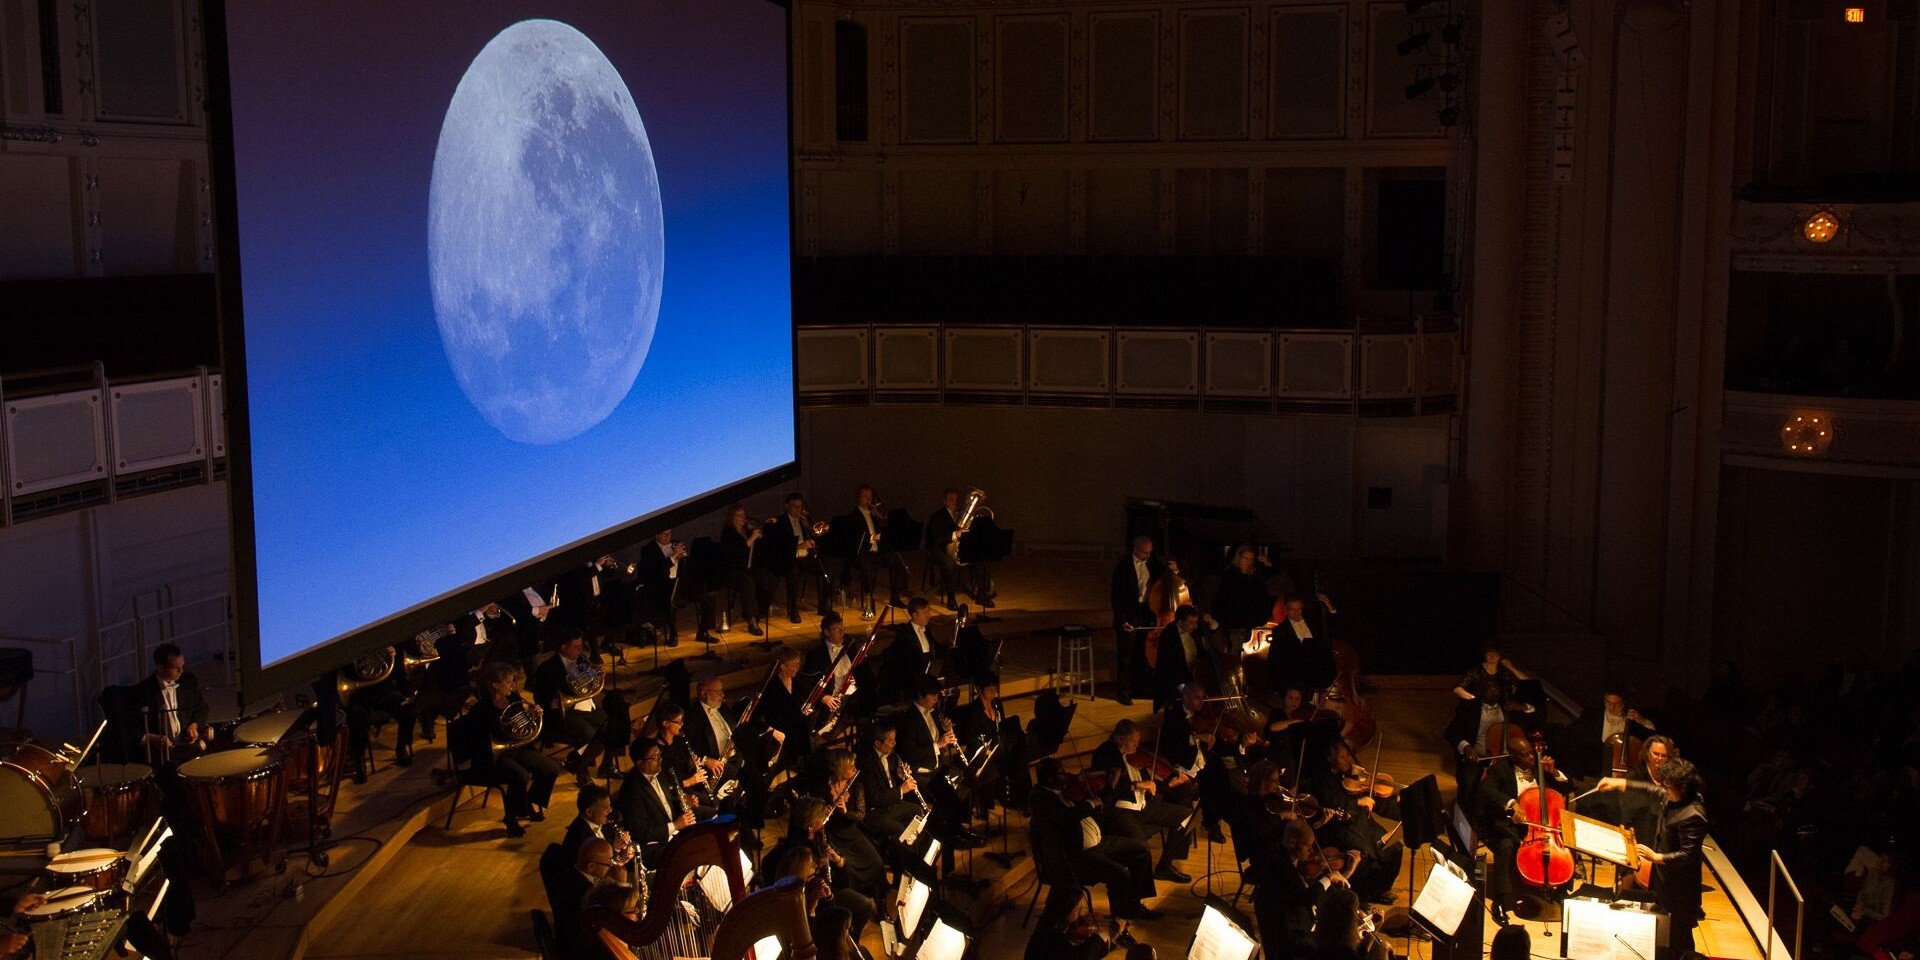 The Singapore Symphony Orchestra transports Man through 50 years of history since the first moon landing